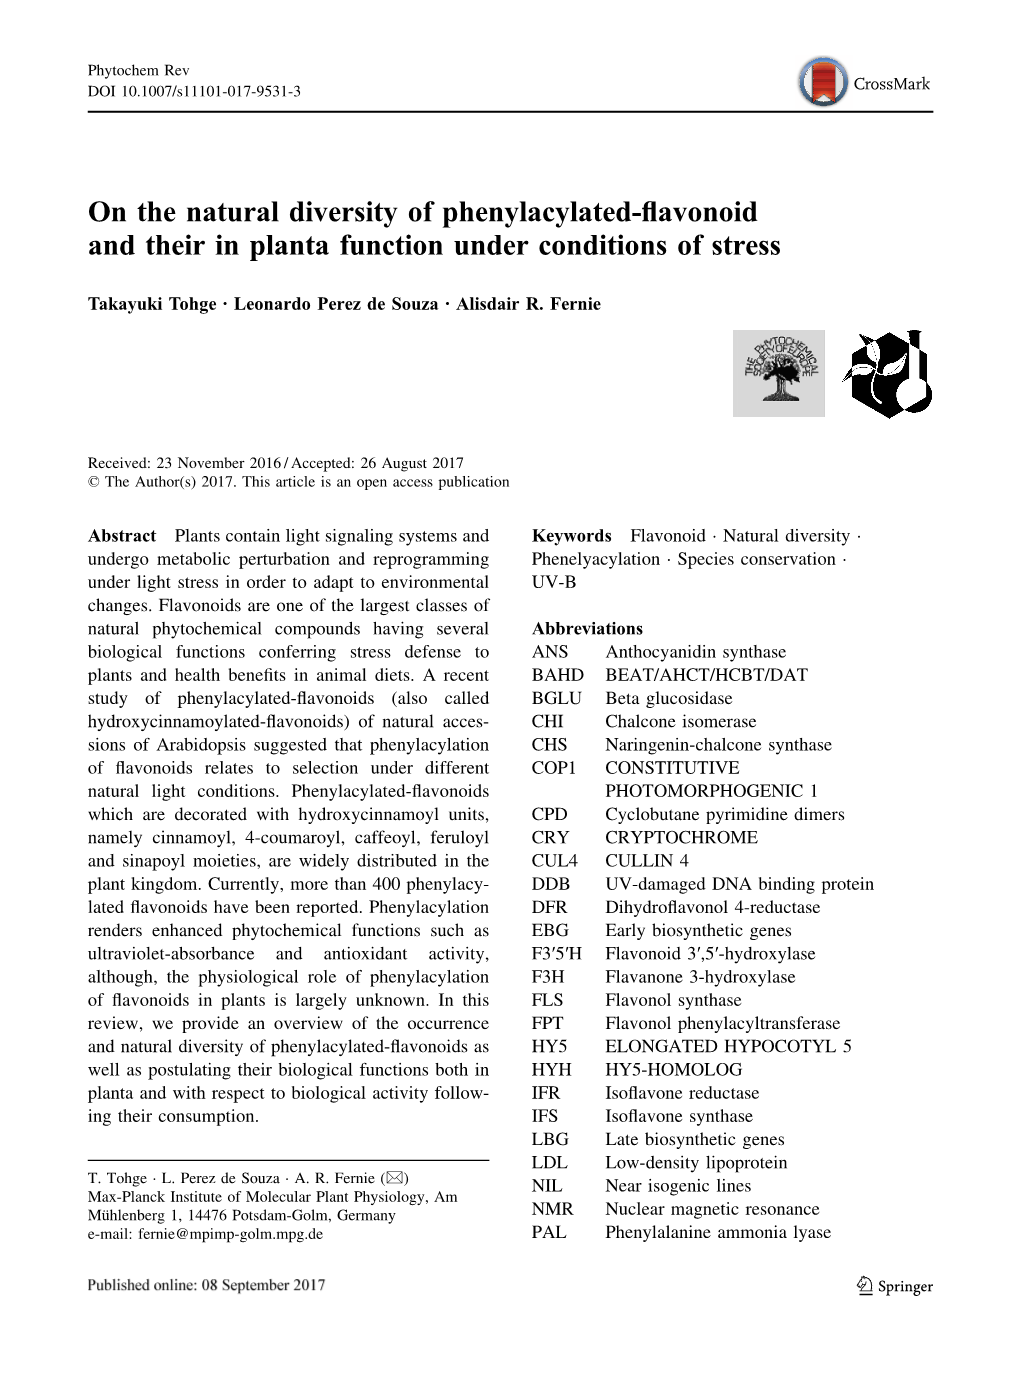 On the Natural Diversity of Phenylacylated-Flavonoid and Their